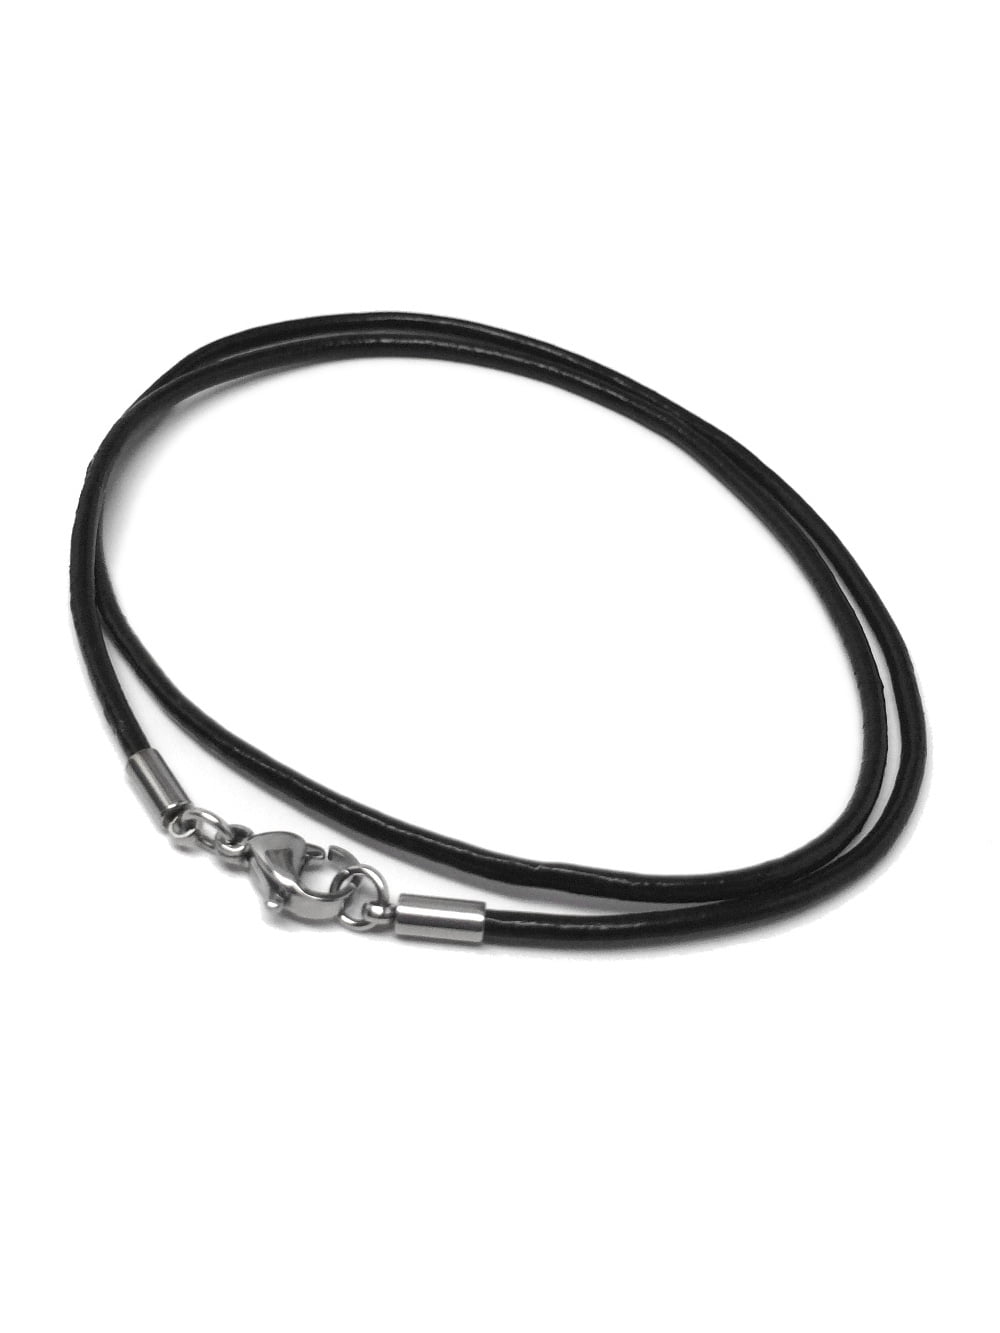 2mm Genuine Black Leather Necklace Cord with Stainless Steel Clasps Mens  Womens